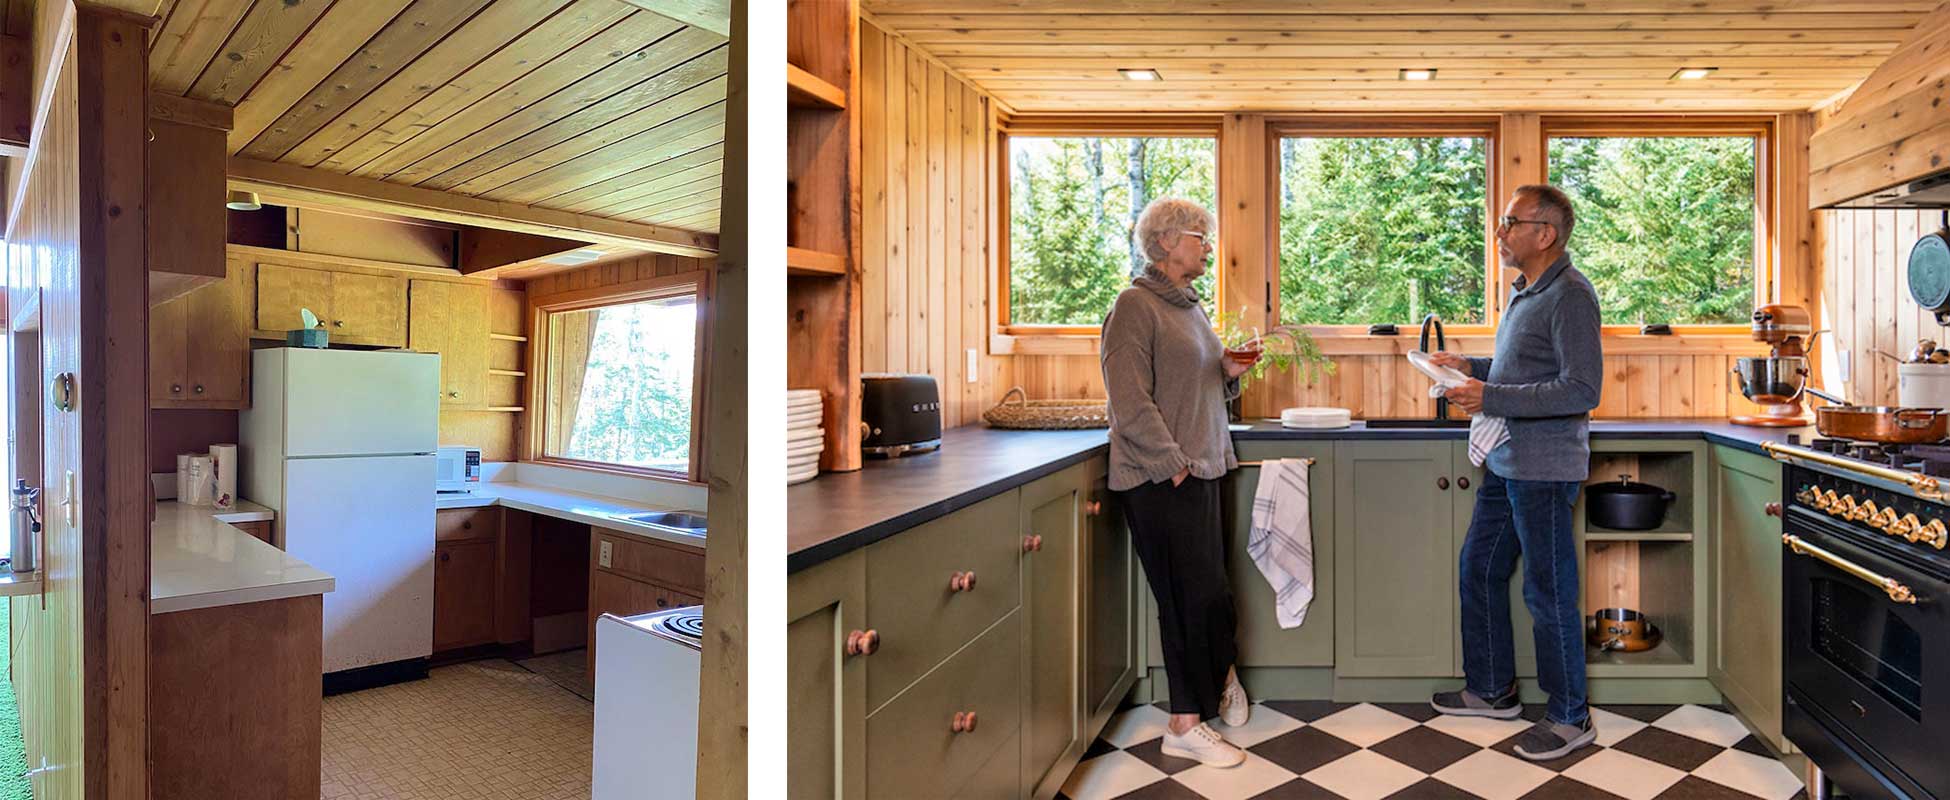 The kitchen before and after with an older couple standing in the kitchen of The Minne Stuga, in front of three Marvin Ultimate Awning windows.